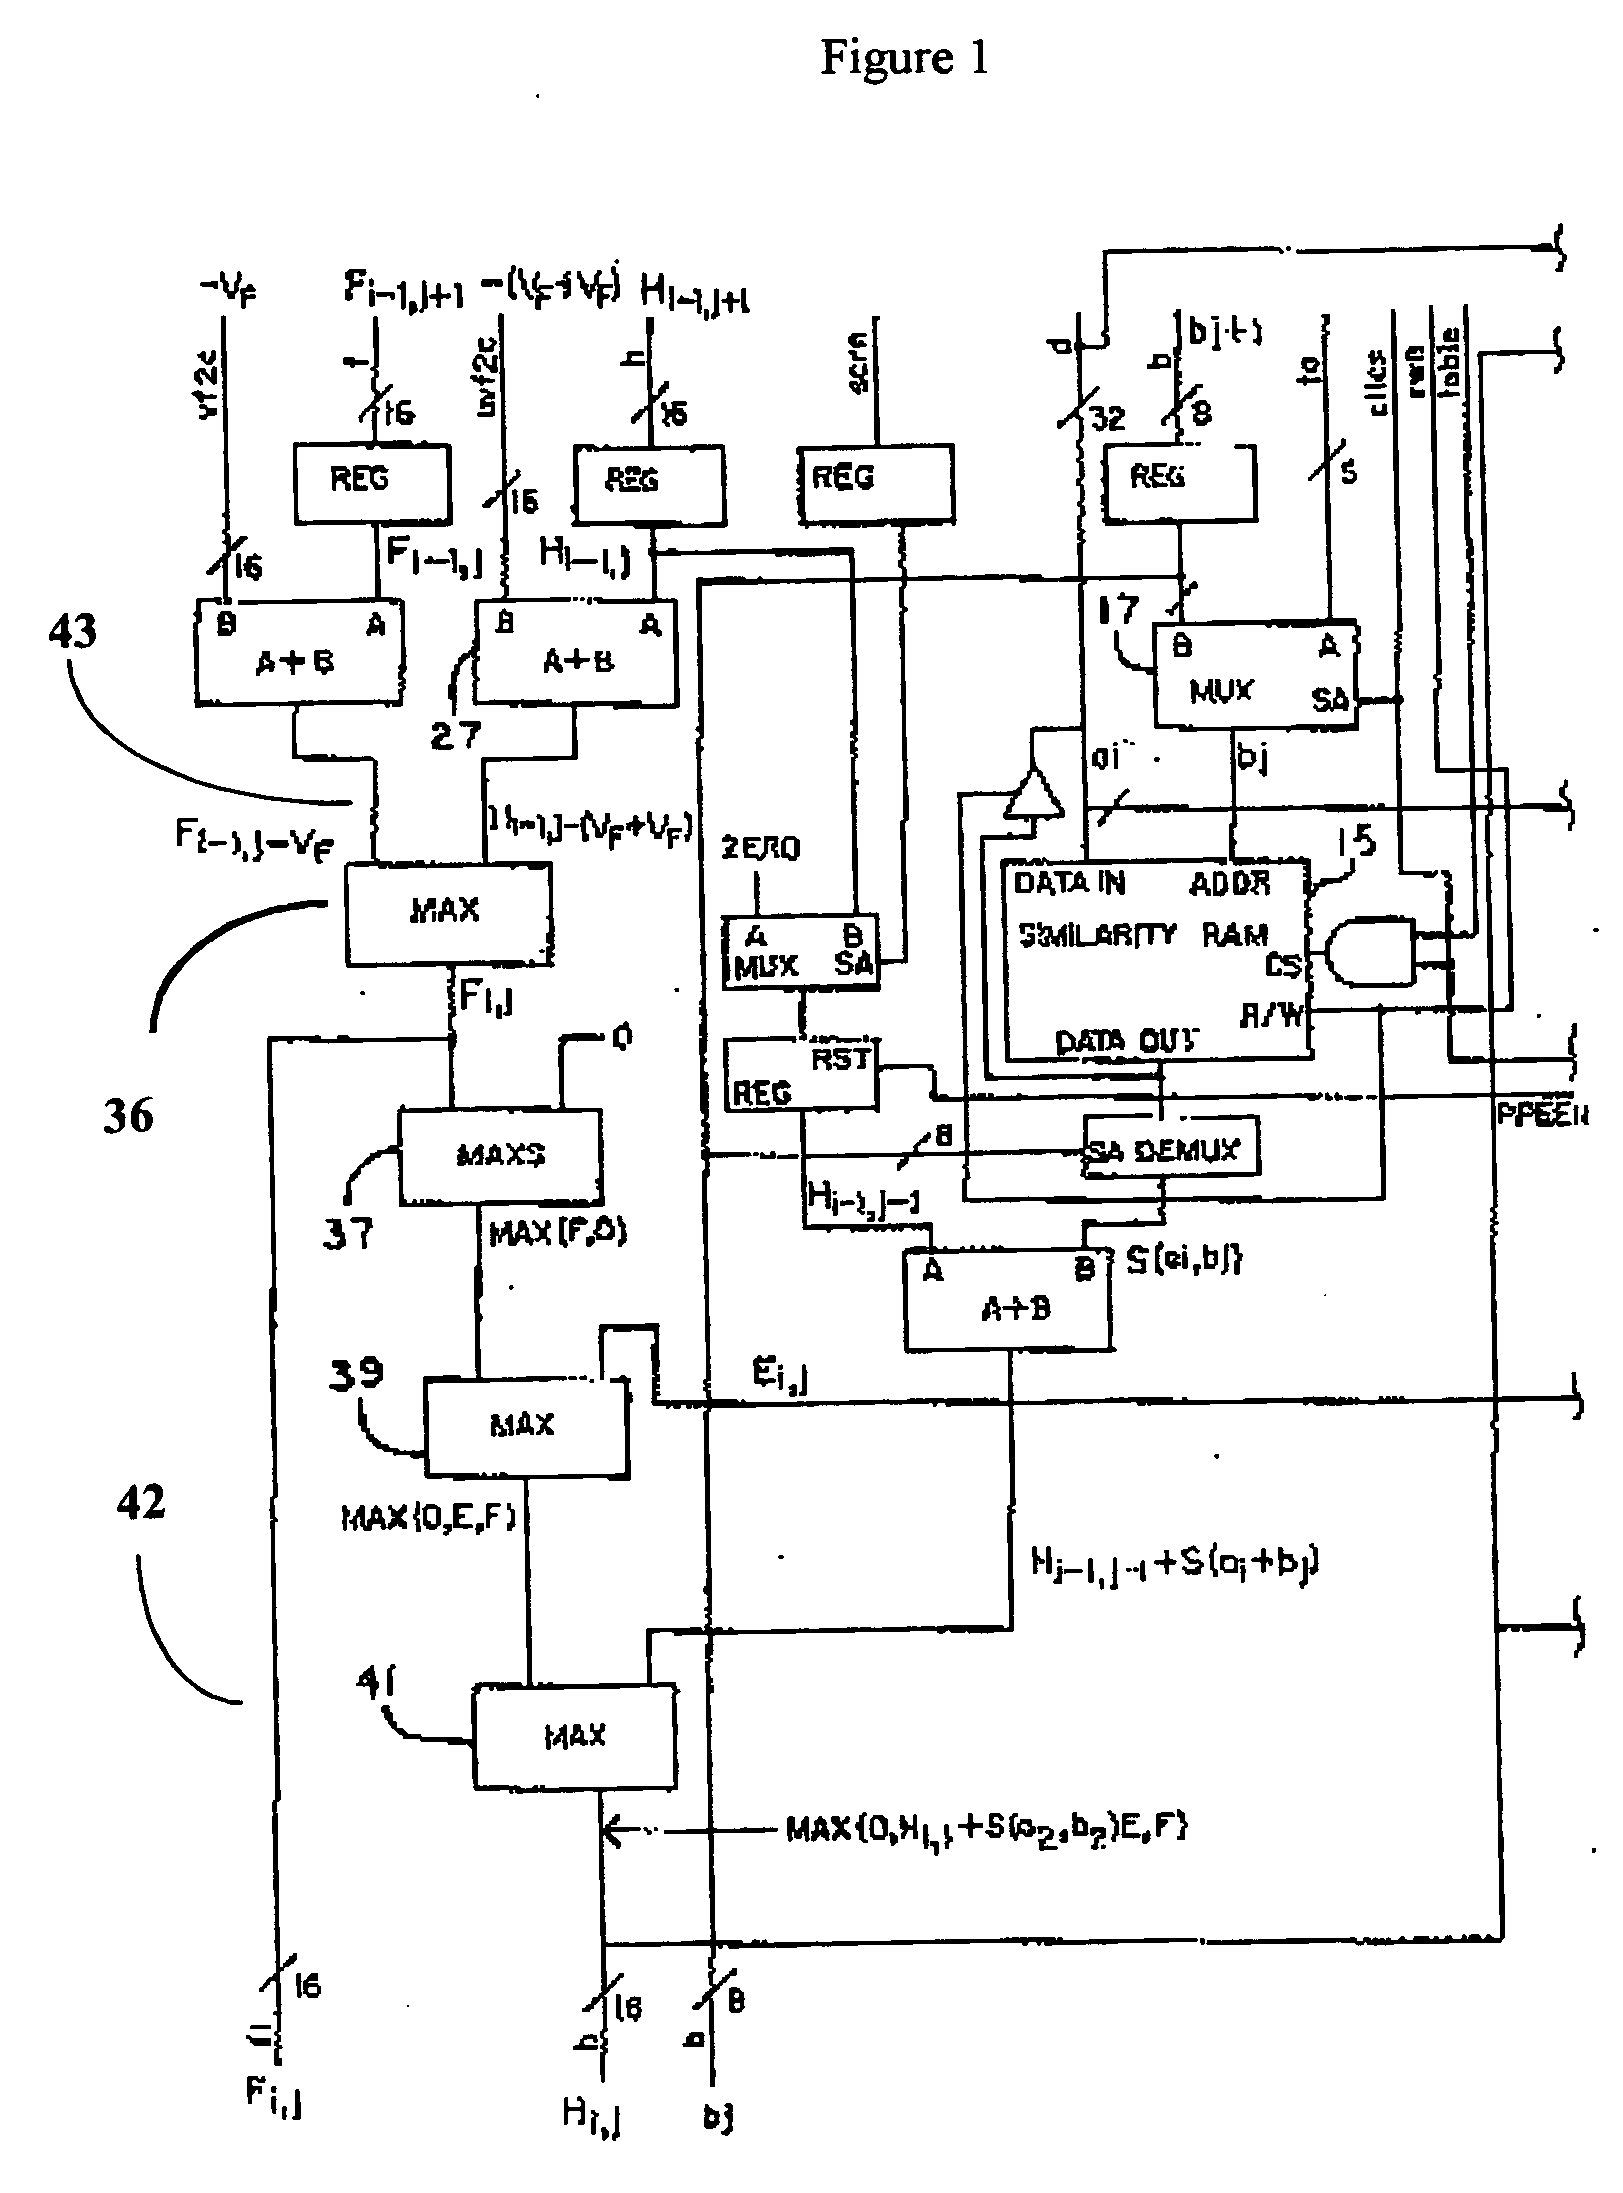 Processors for multi-dimensional sequence comparisons